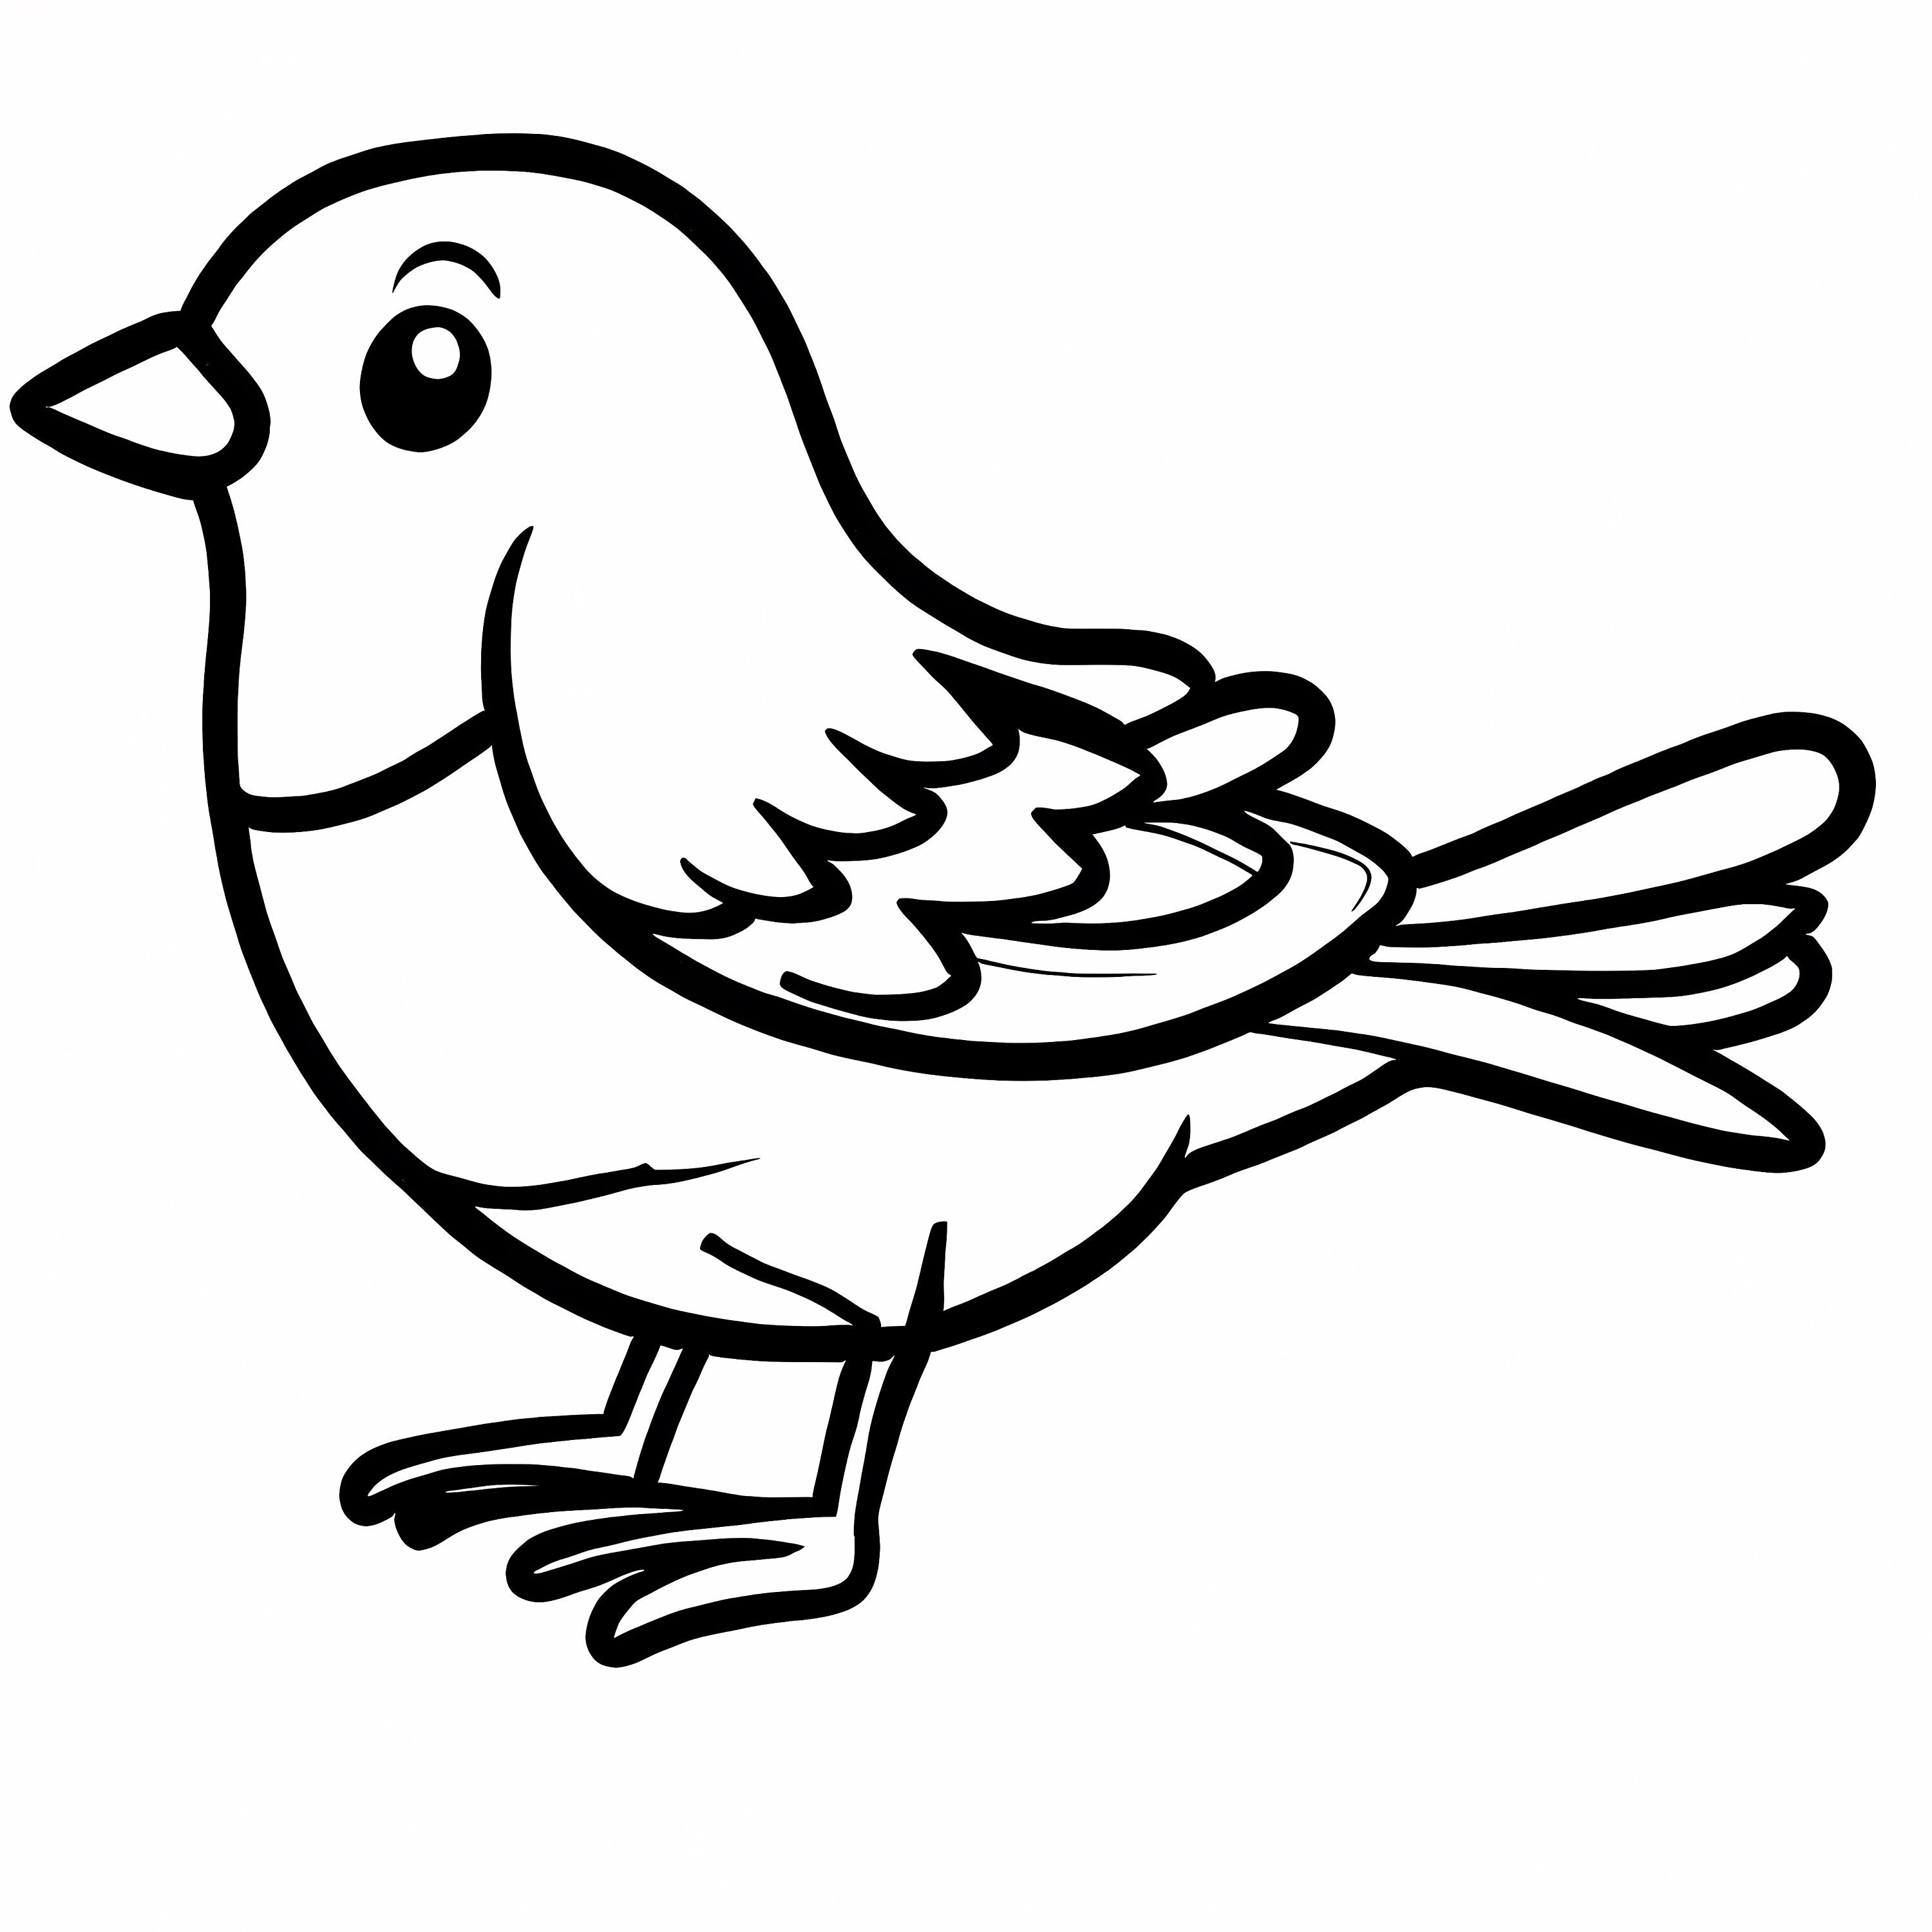 Cute Birds Coloring Page for Kids Graphic by MyCreativeLife